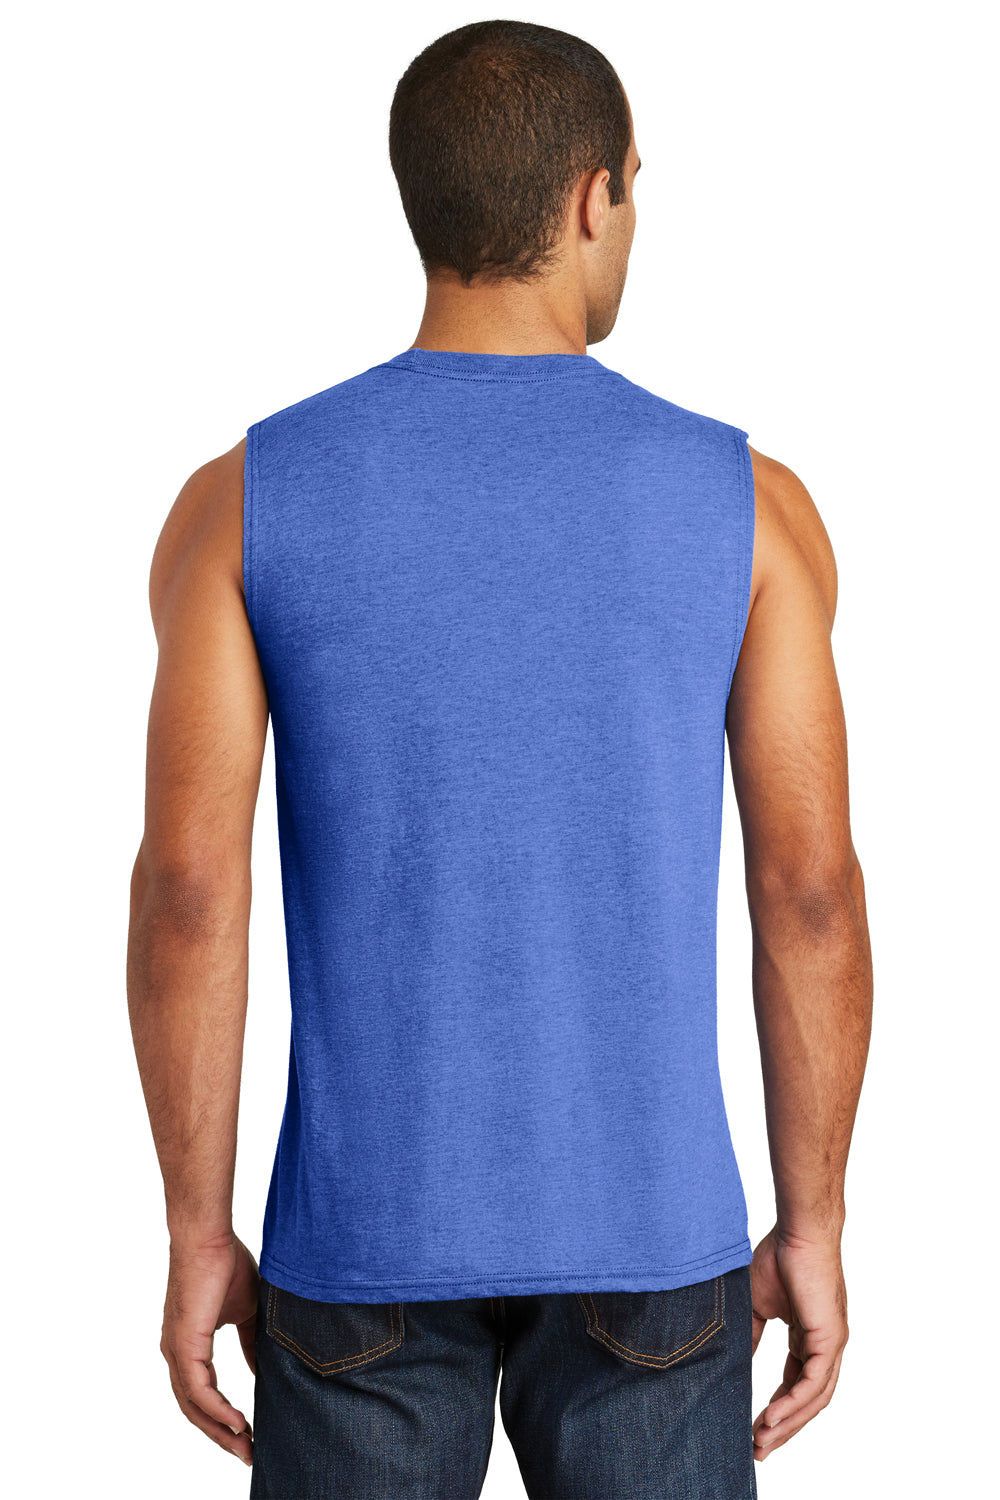 District DT6300 Mens Very Important Muscle Tank Top Royal Blue Frost Back